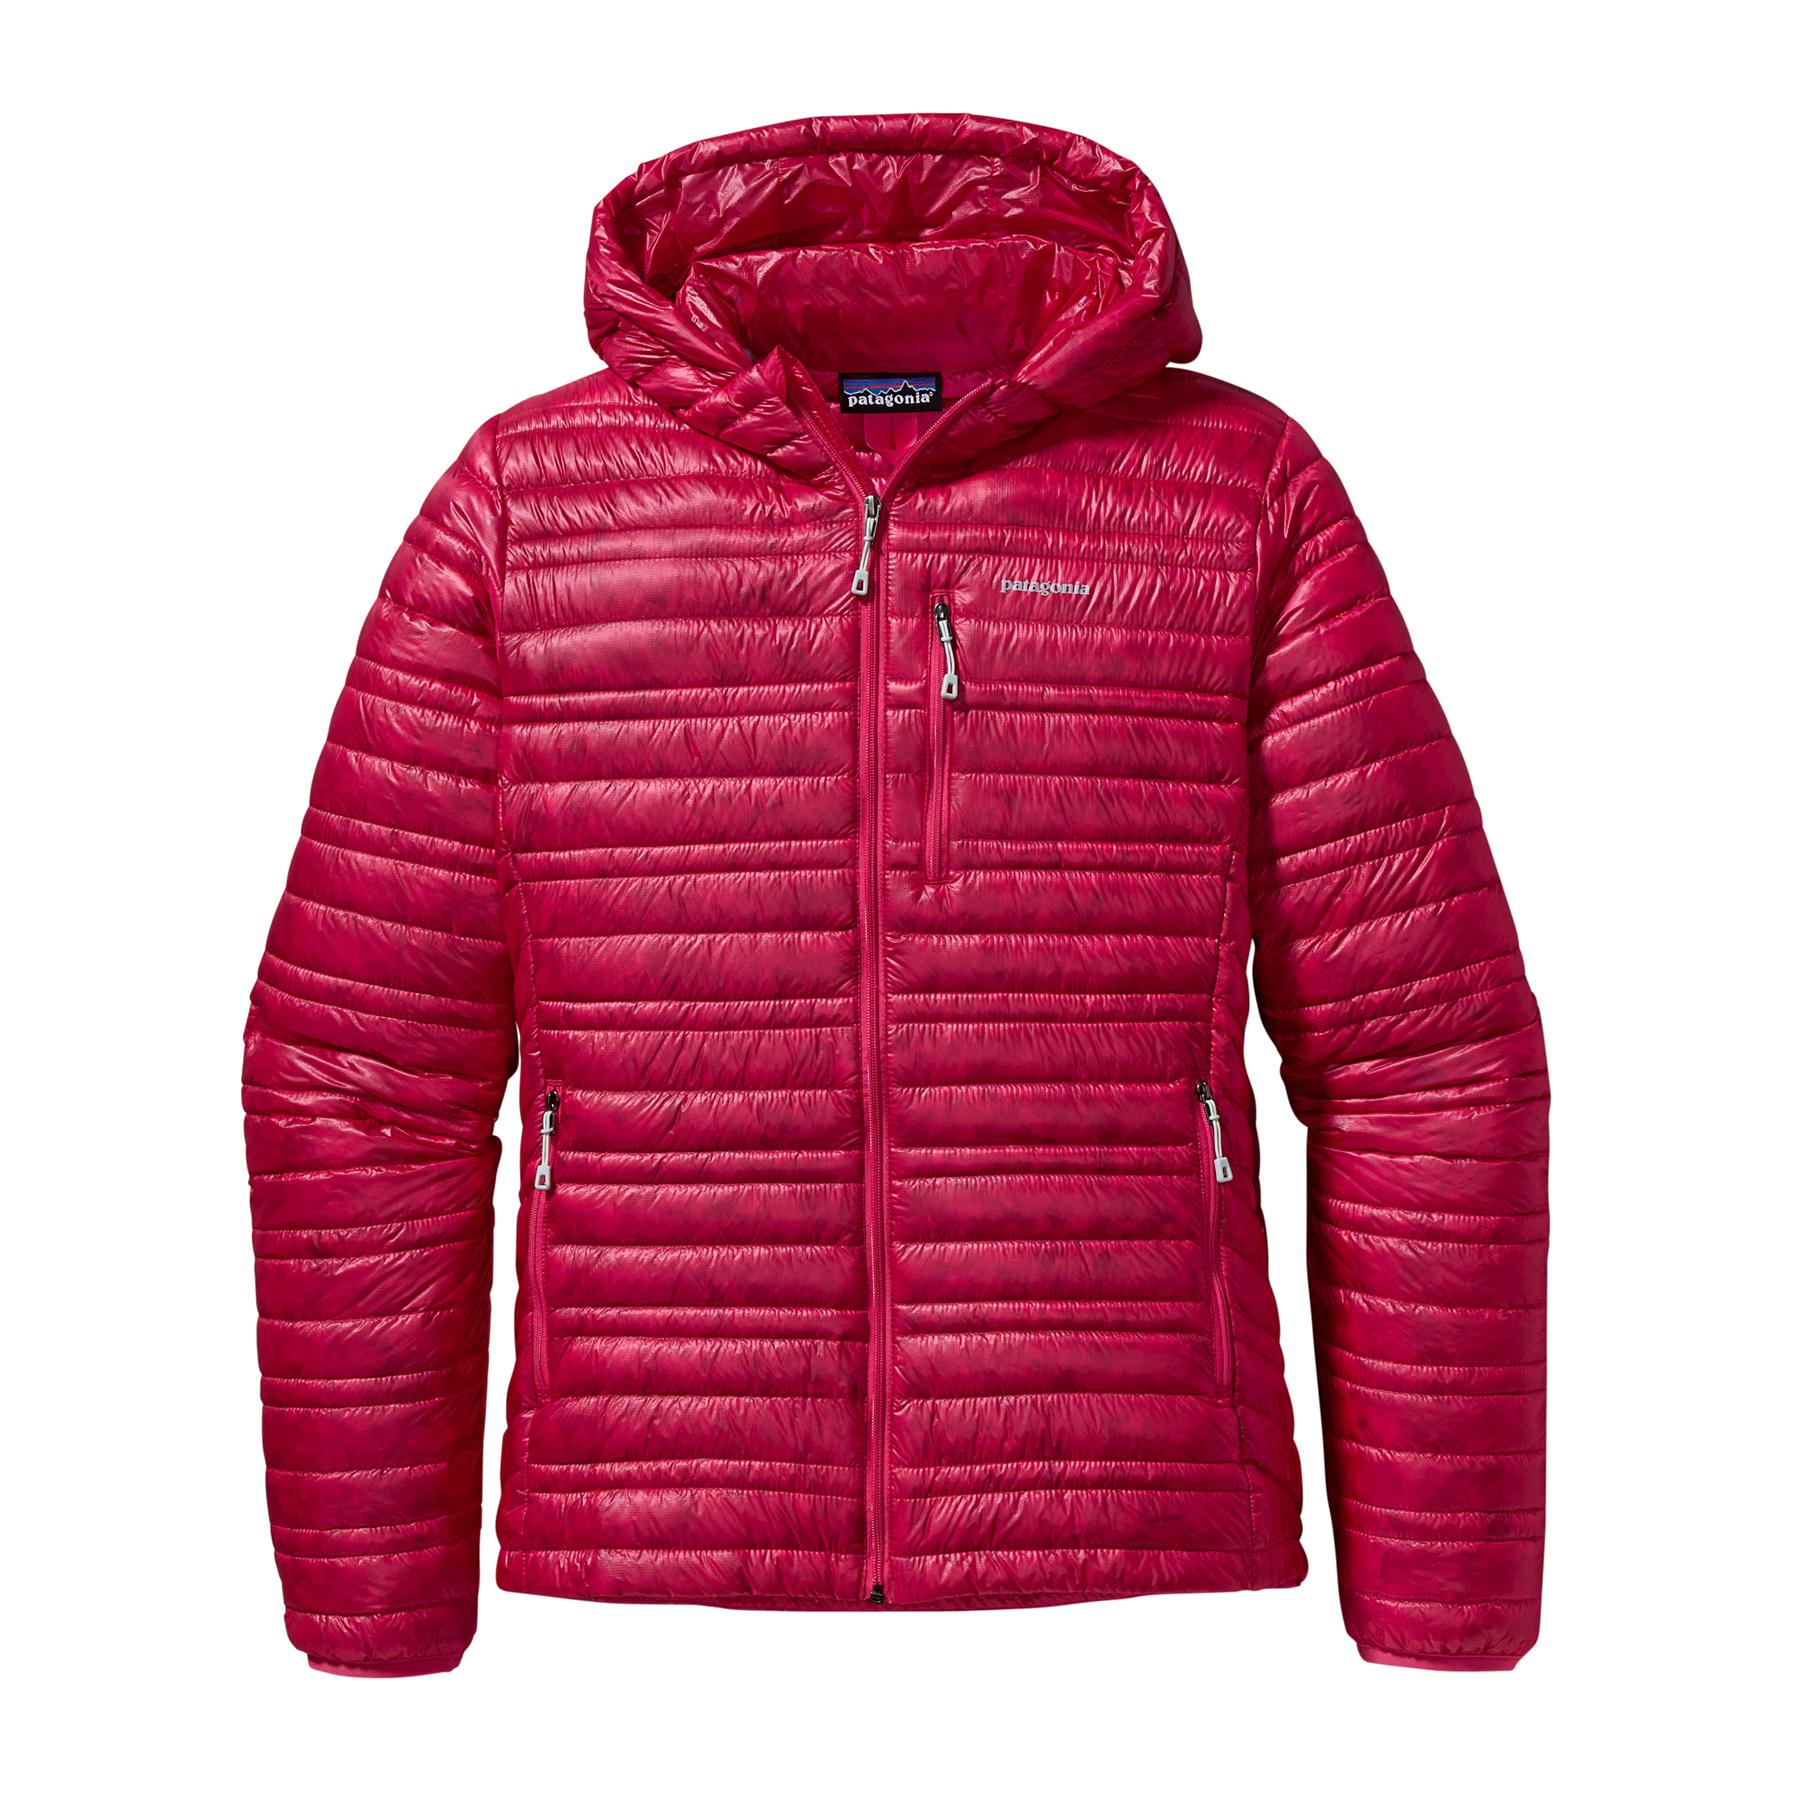 Foto Patagonia Ultralight Down Hoody Lady Rossi Pink (Modell 2013) foto 454044